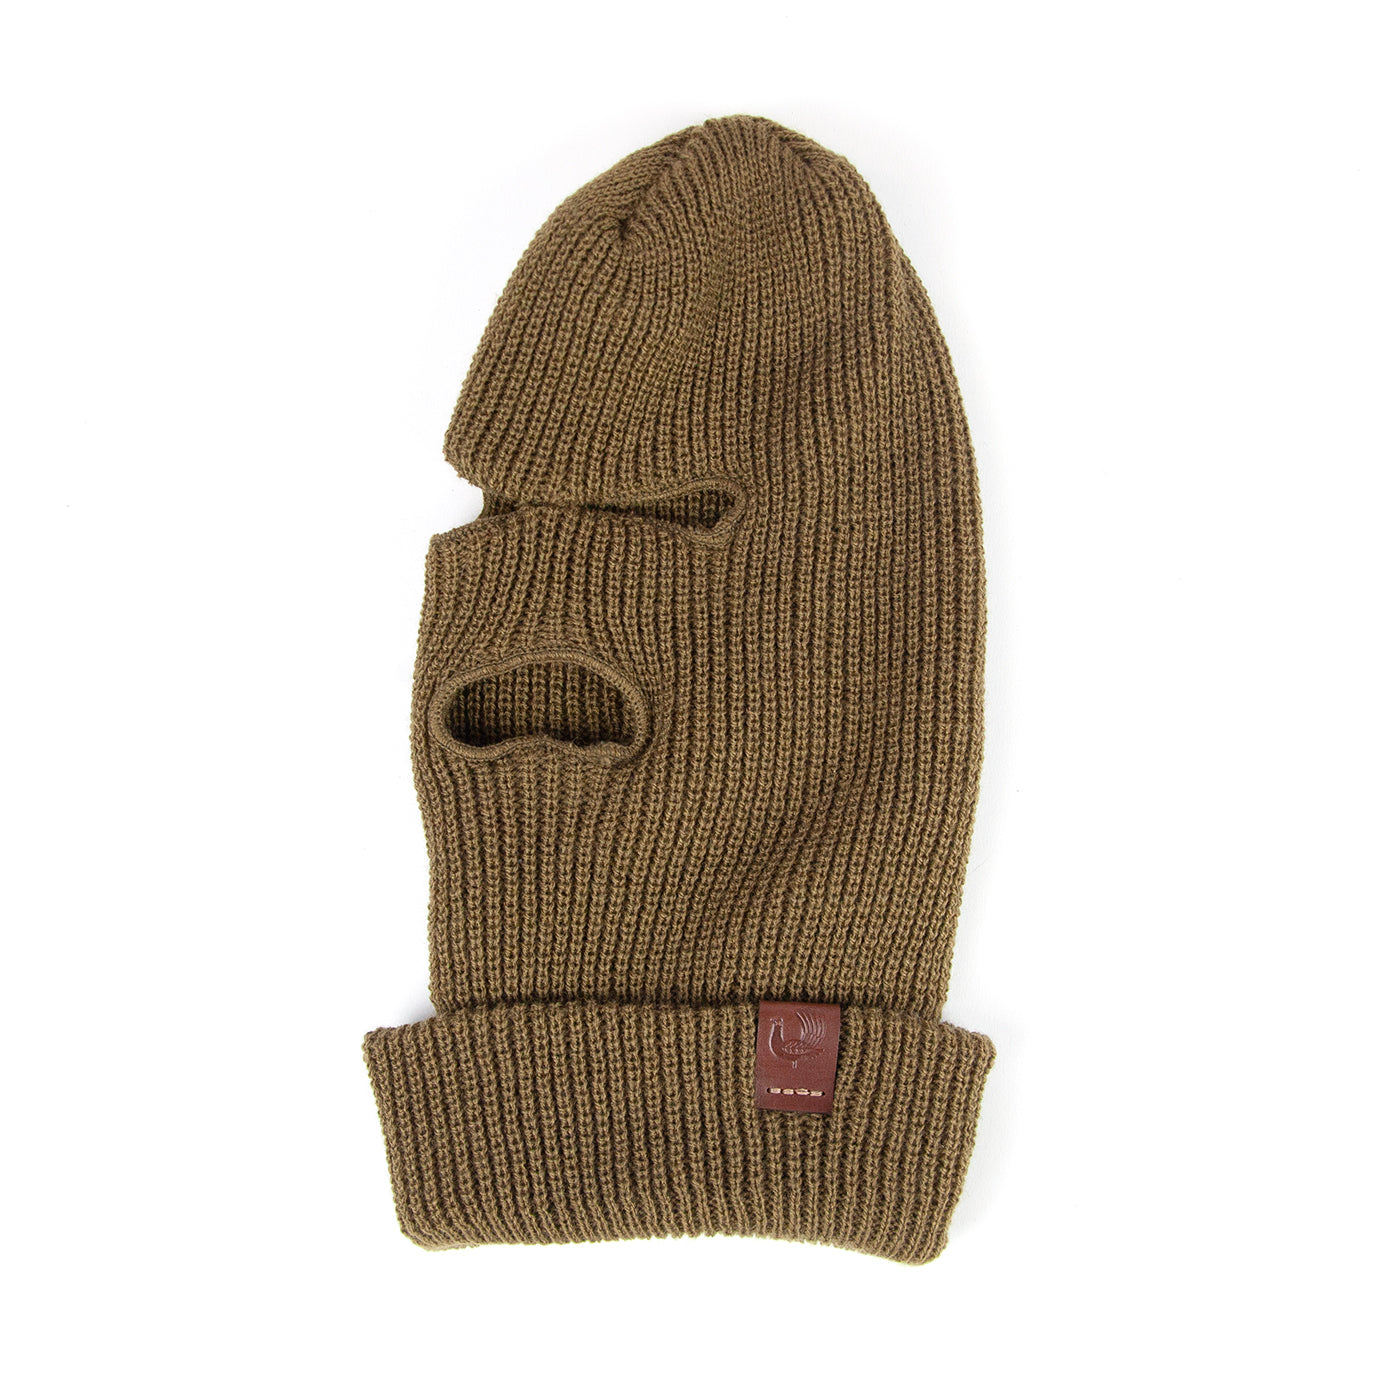 Knit Face Mask - Coyote